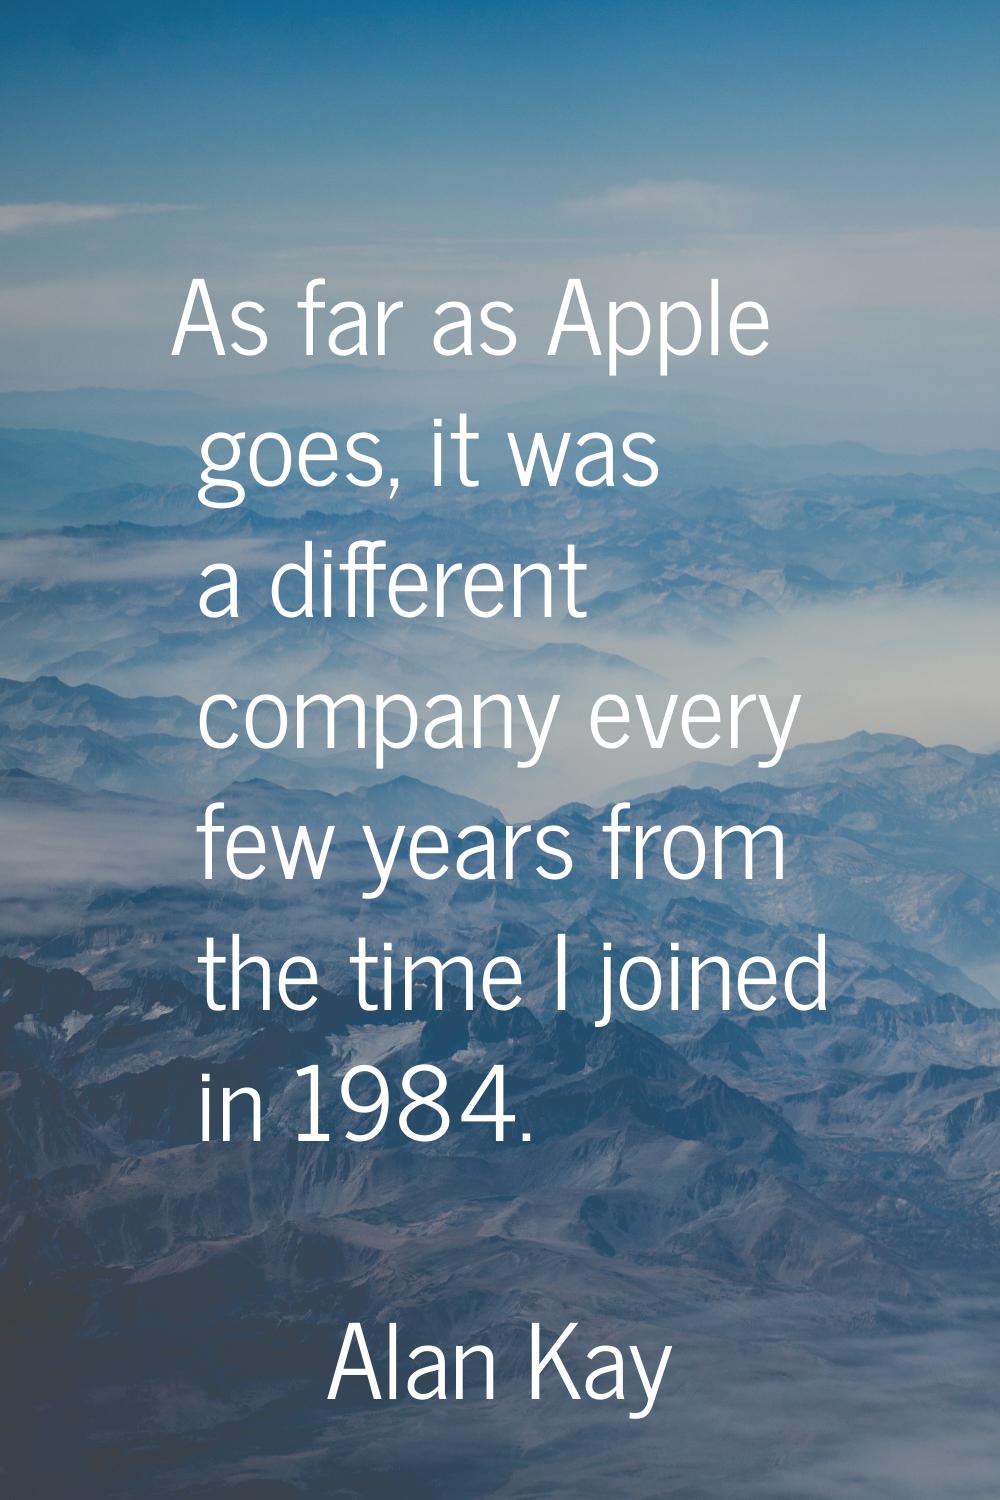 As far as Apple goes, it was a different company every few years from the time I joined in 1984.